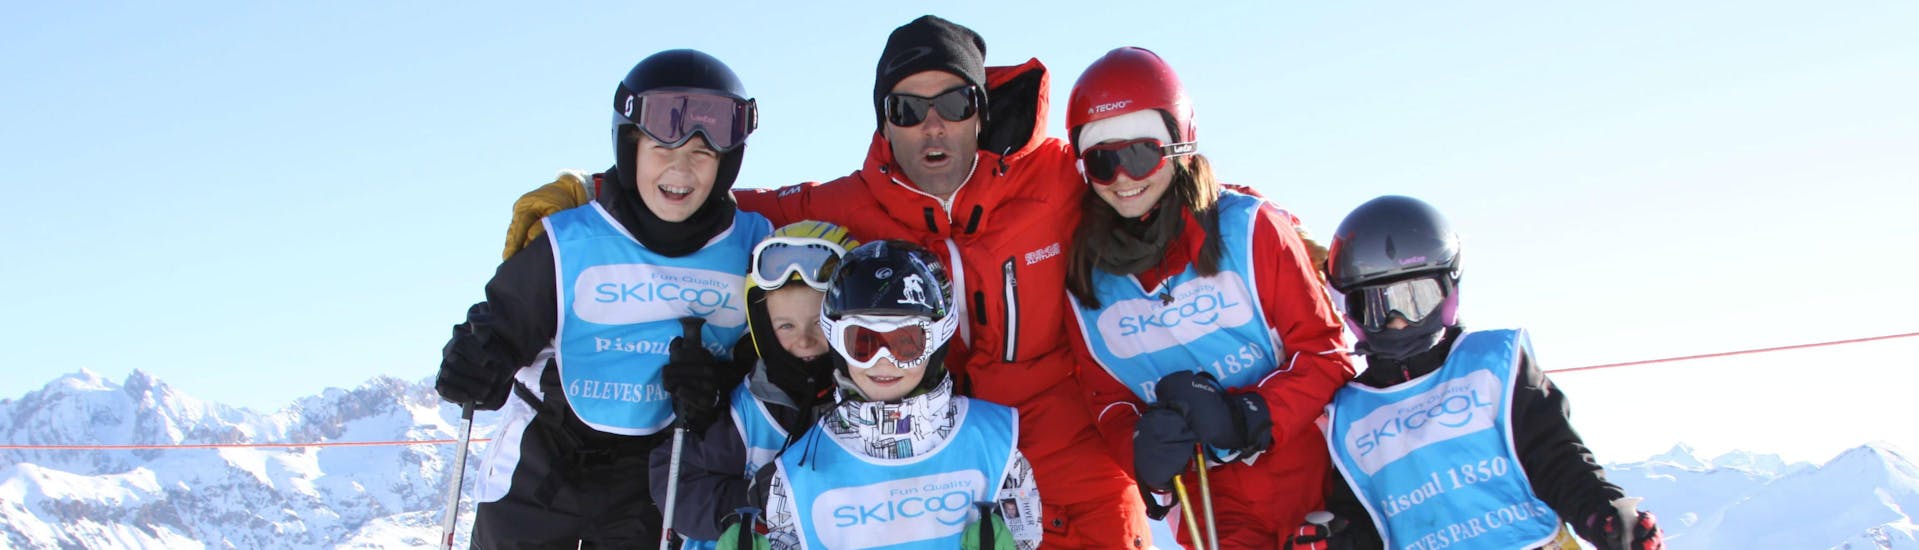 Ski Lessons for Kids (5-12 y.) - Holiday - Full Week.